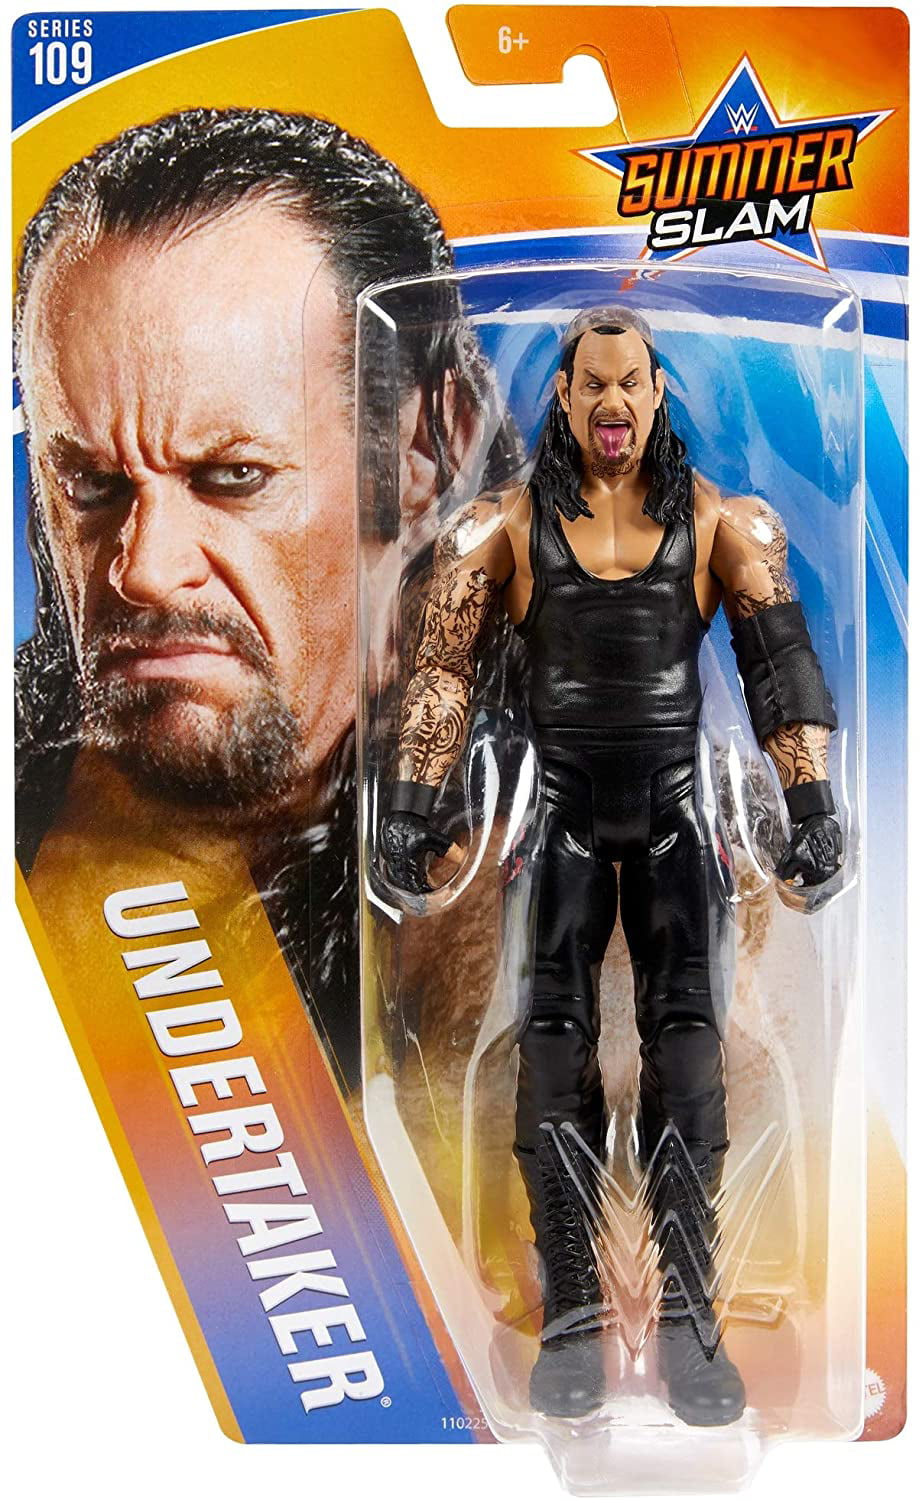 3x WWE Big Show Undertaker The Rock Wrestling Action Figures Kid Child Toy Gift 